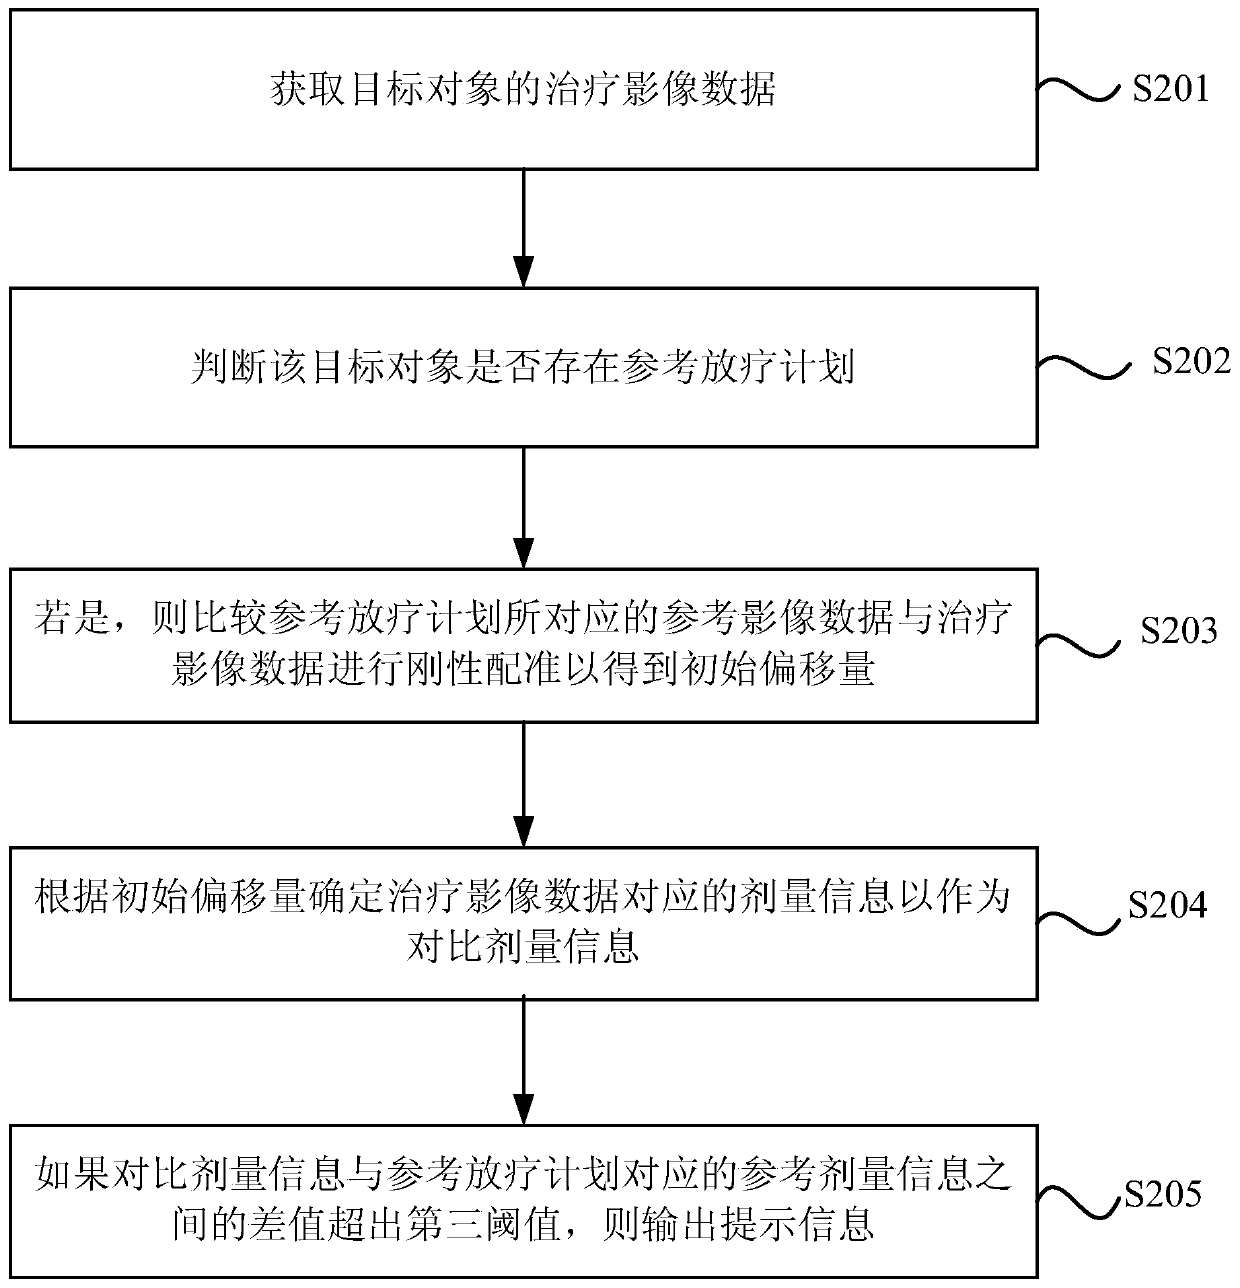 Dosage-guided positioning device, dosage monitoring device, radiotherapy system and medium